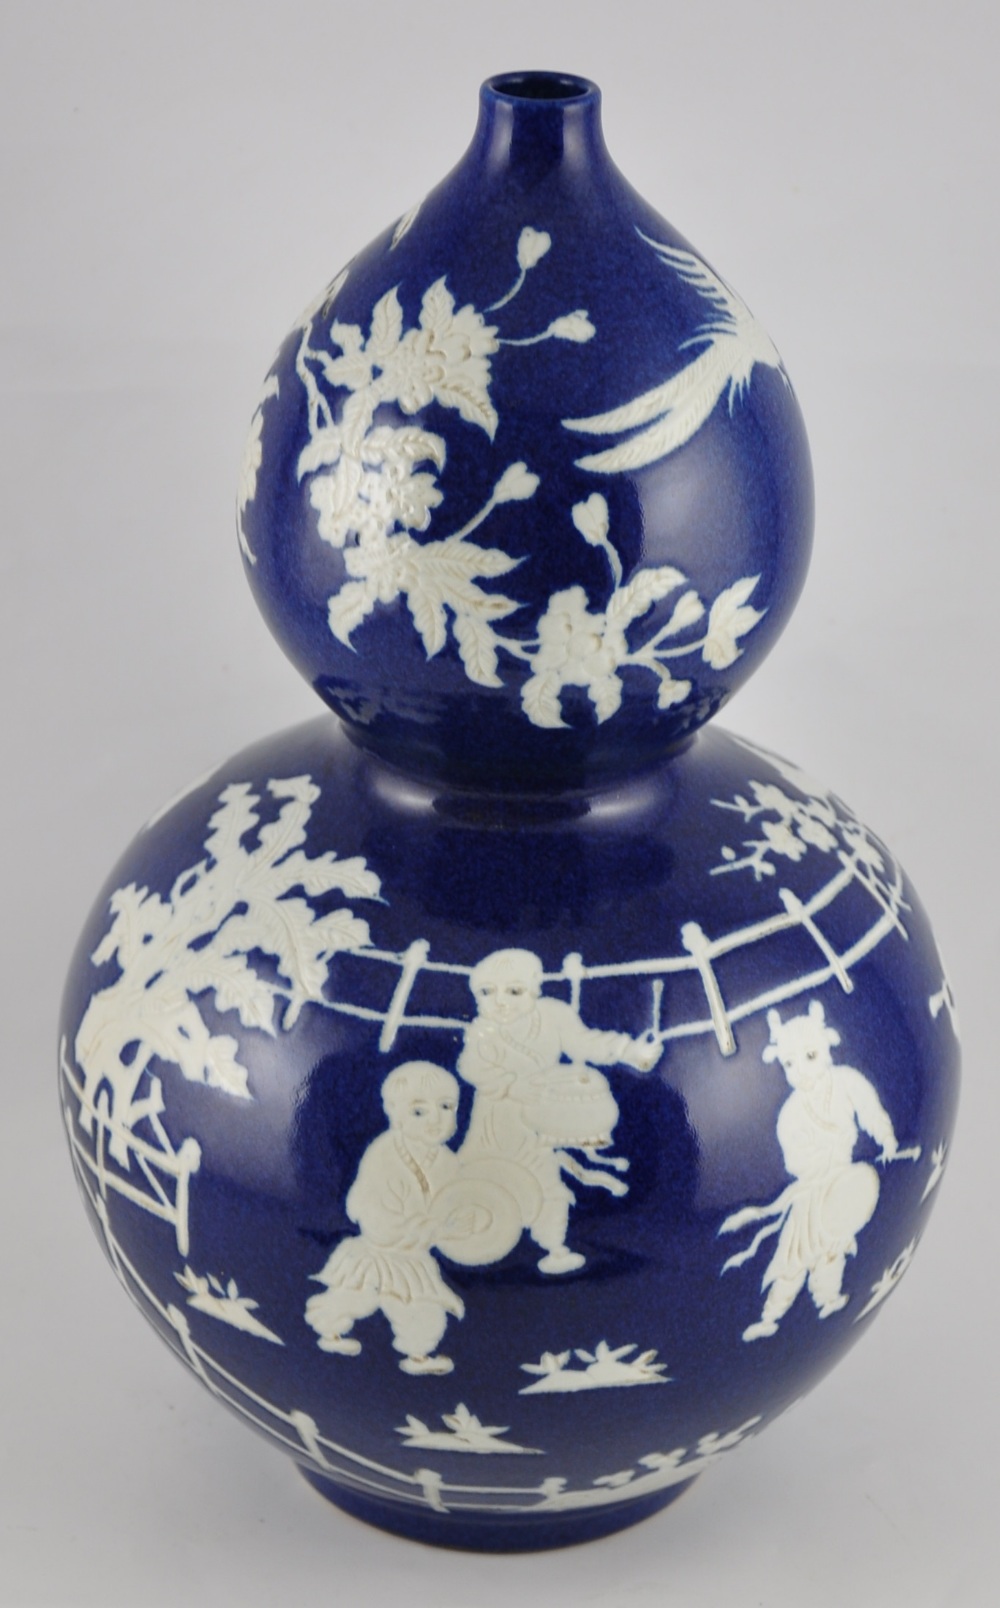 A large Chinese double gourd vase with a deep blue glaze and decorated with scenes of children